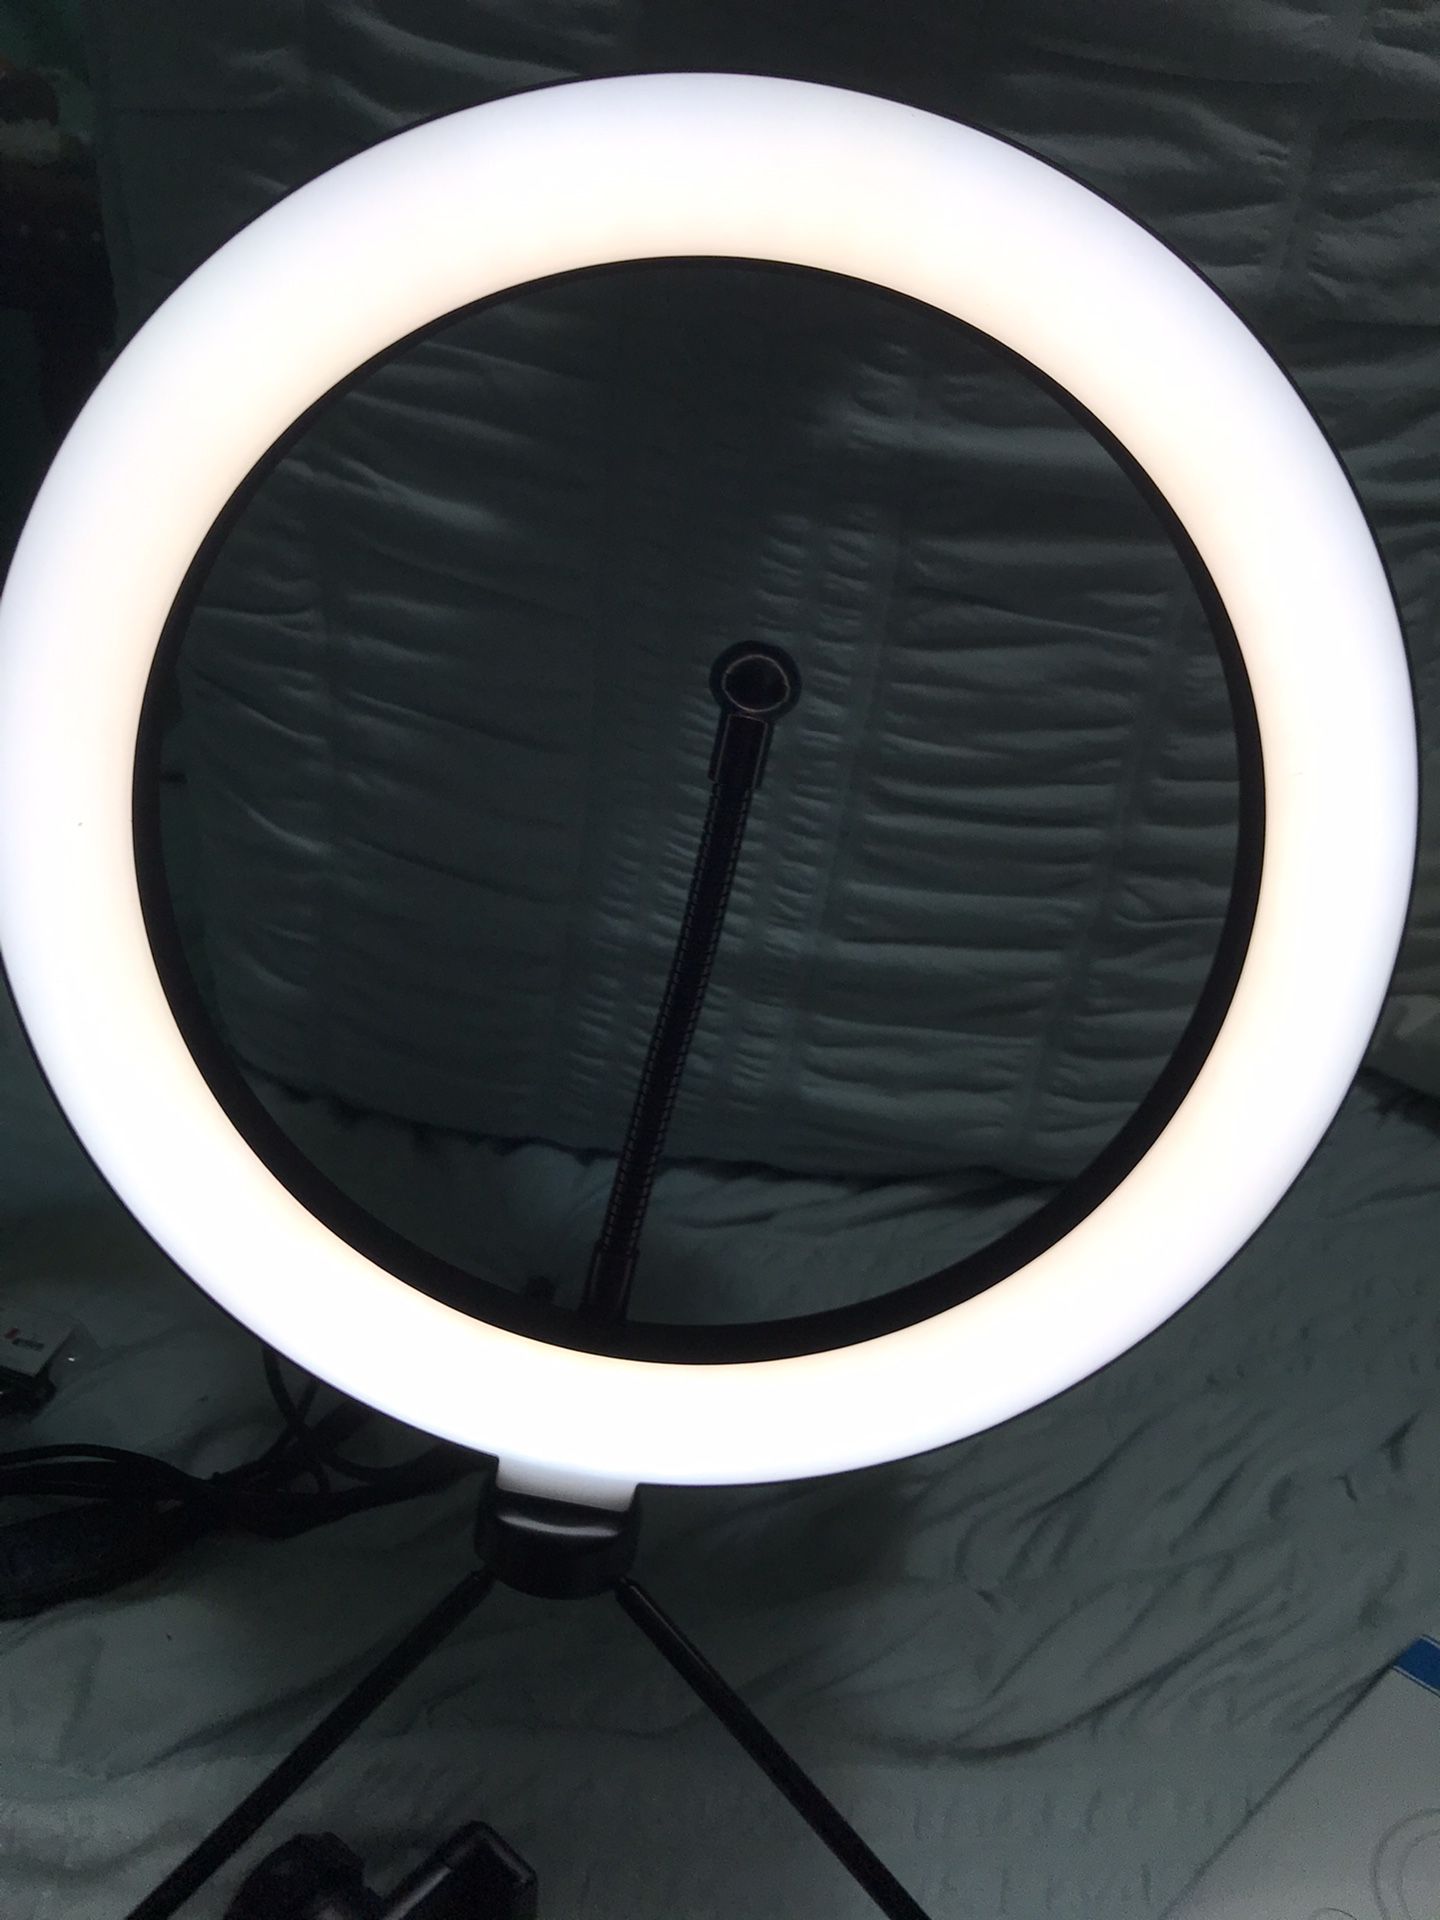 10” LED Light Selfie Ring With Tripod Stand, Phone Holder, And Remote Control